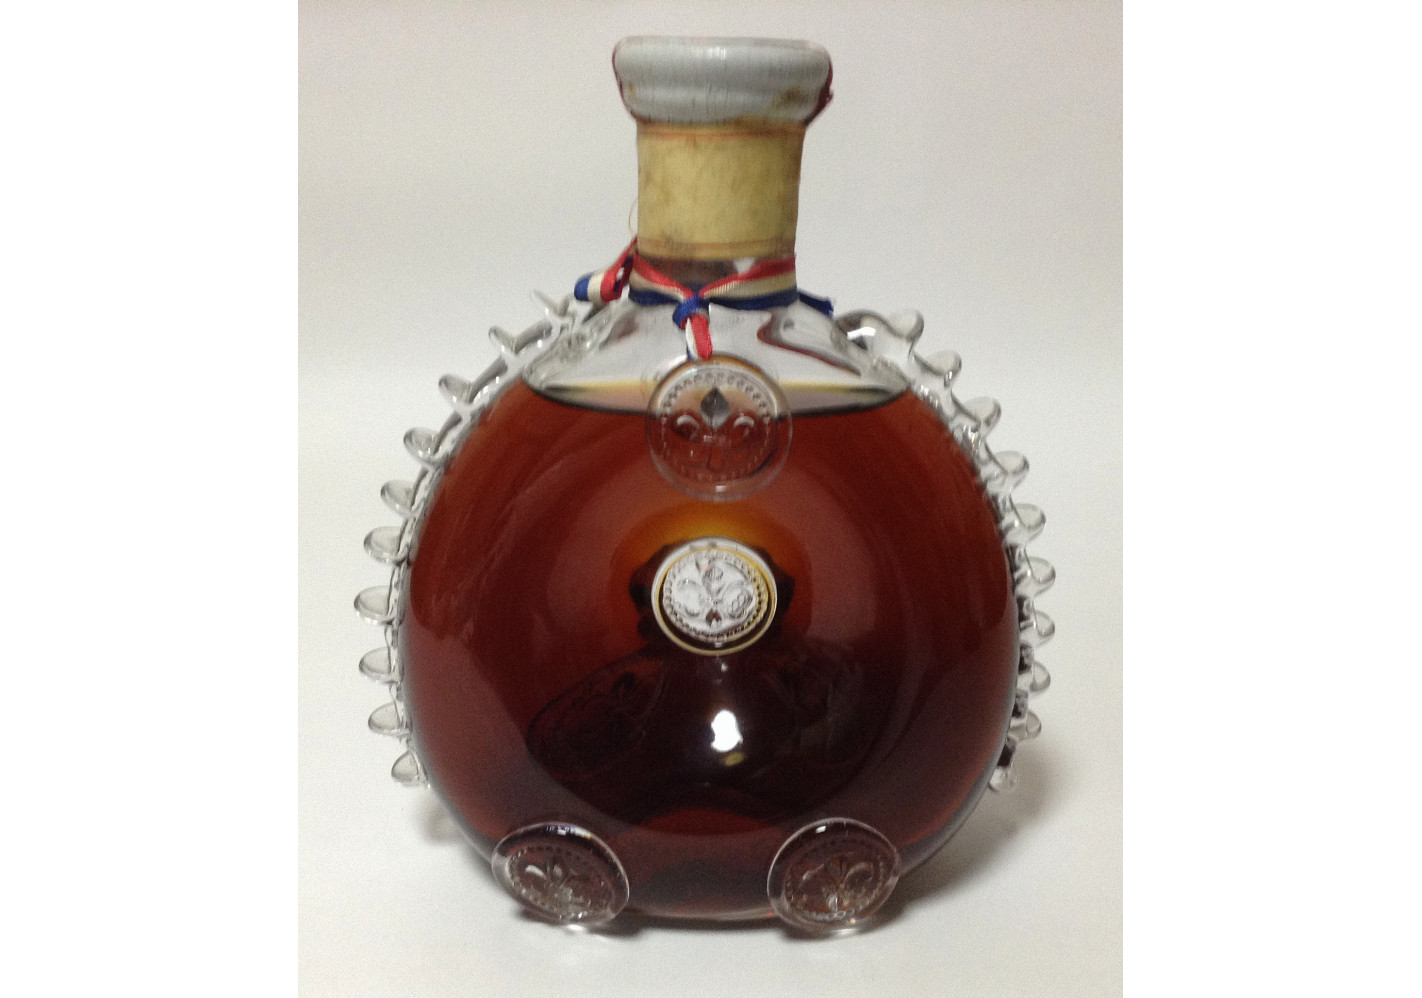 Remy Martin Louis Xiii Grand Champagne Cognac France 750ml